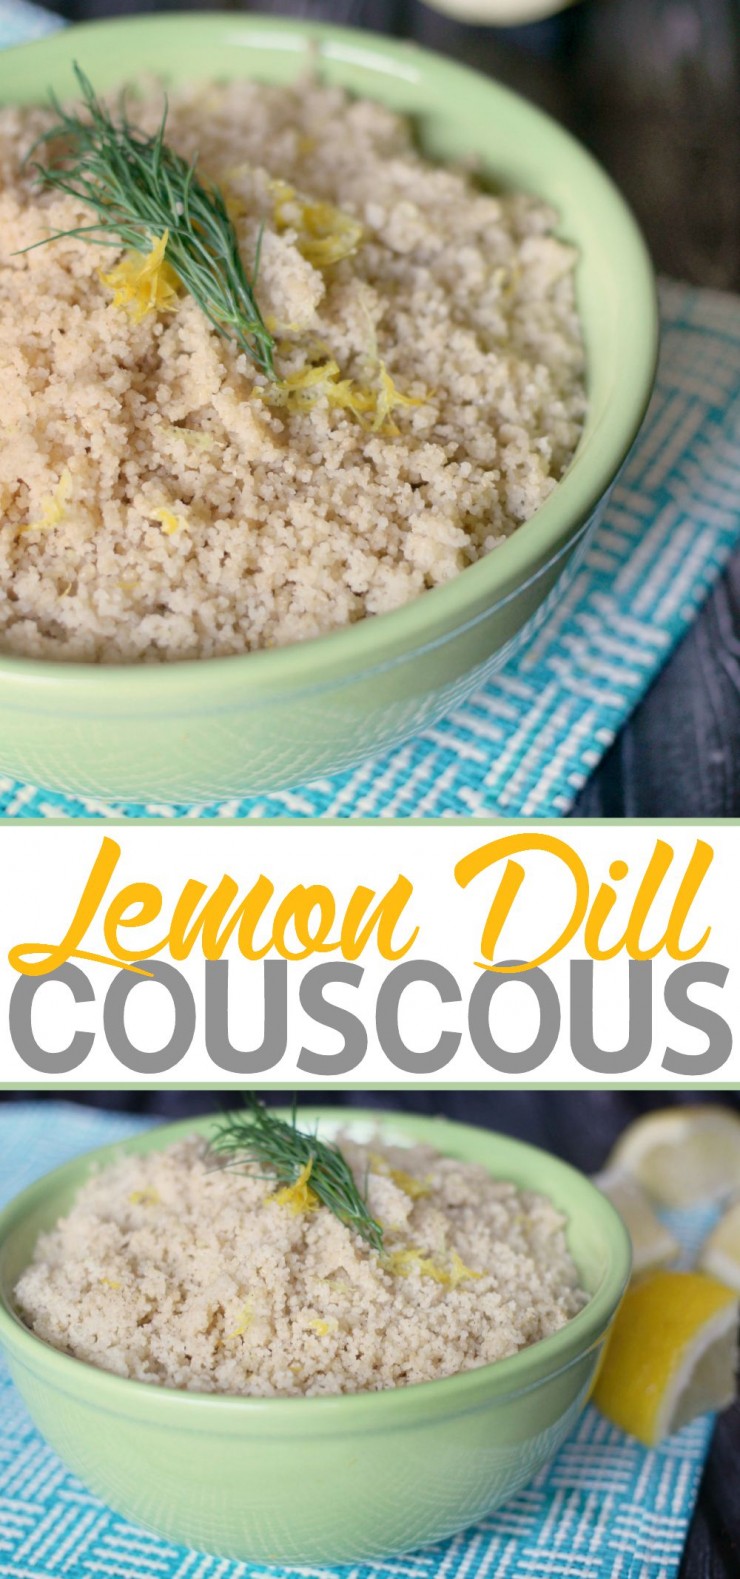 This Lemon Dill Couscous recipe is simple and delicious, a perfect and healthy side dish!